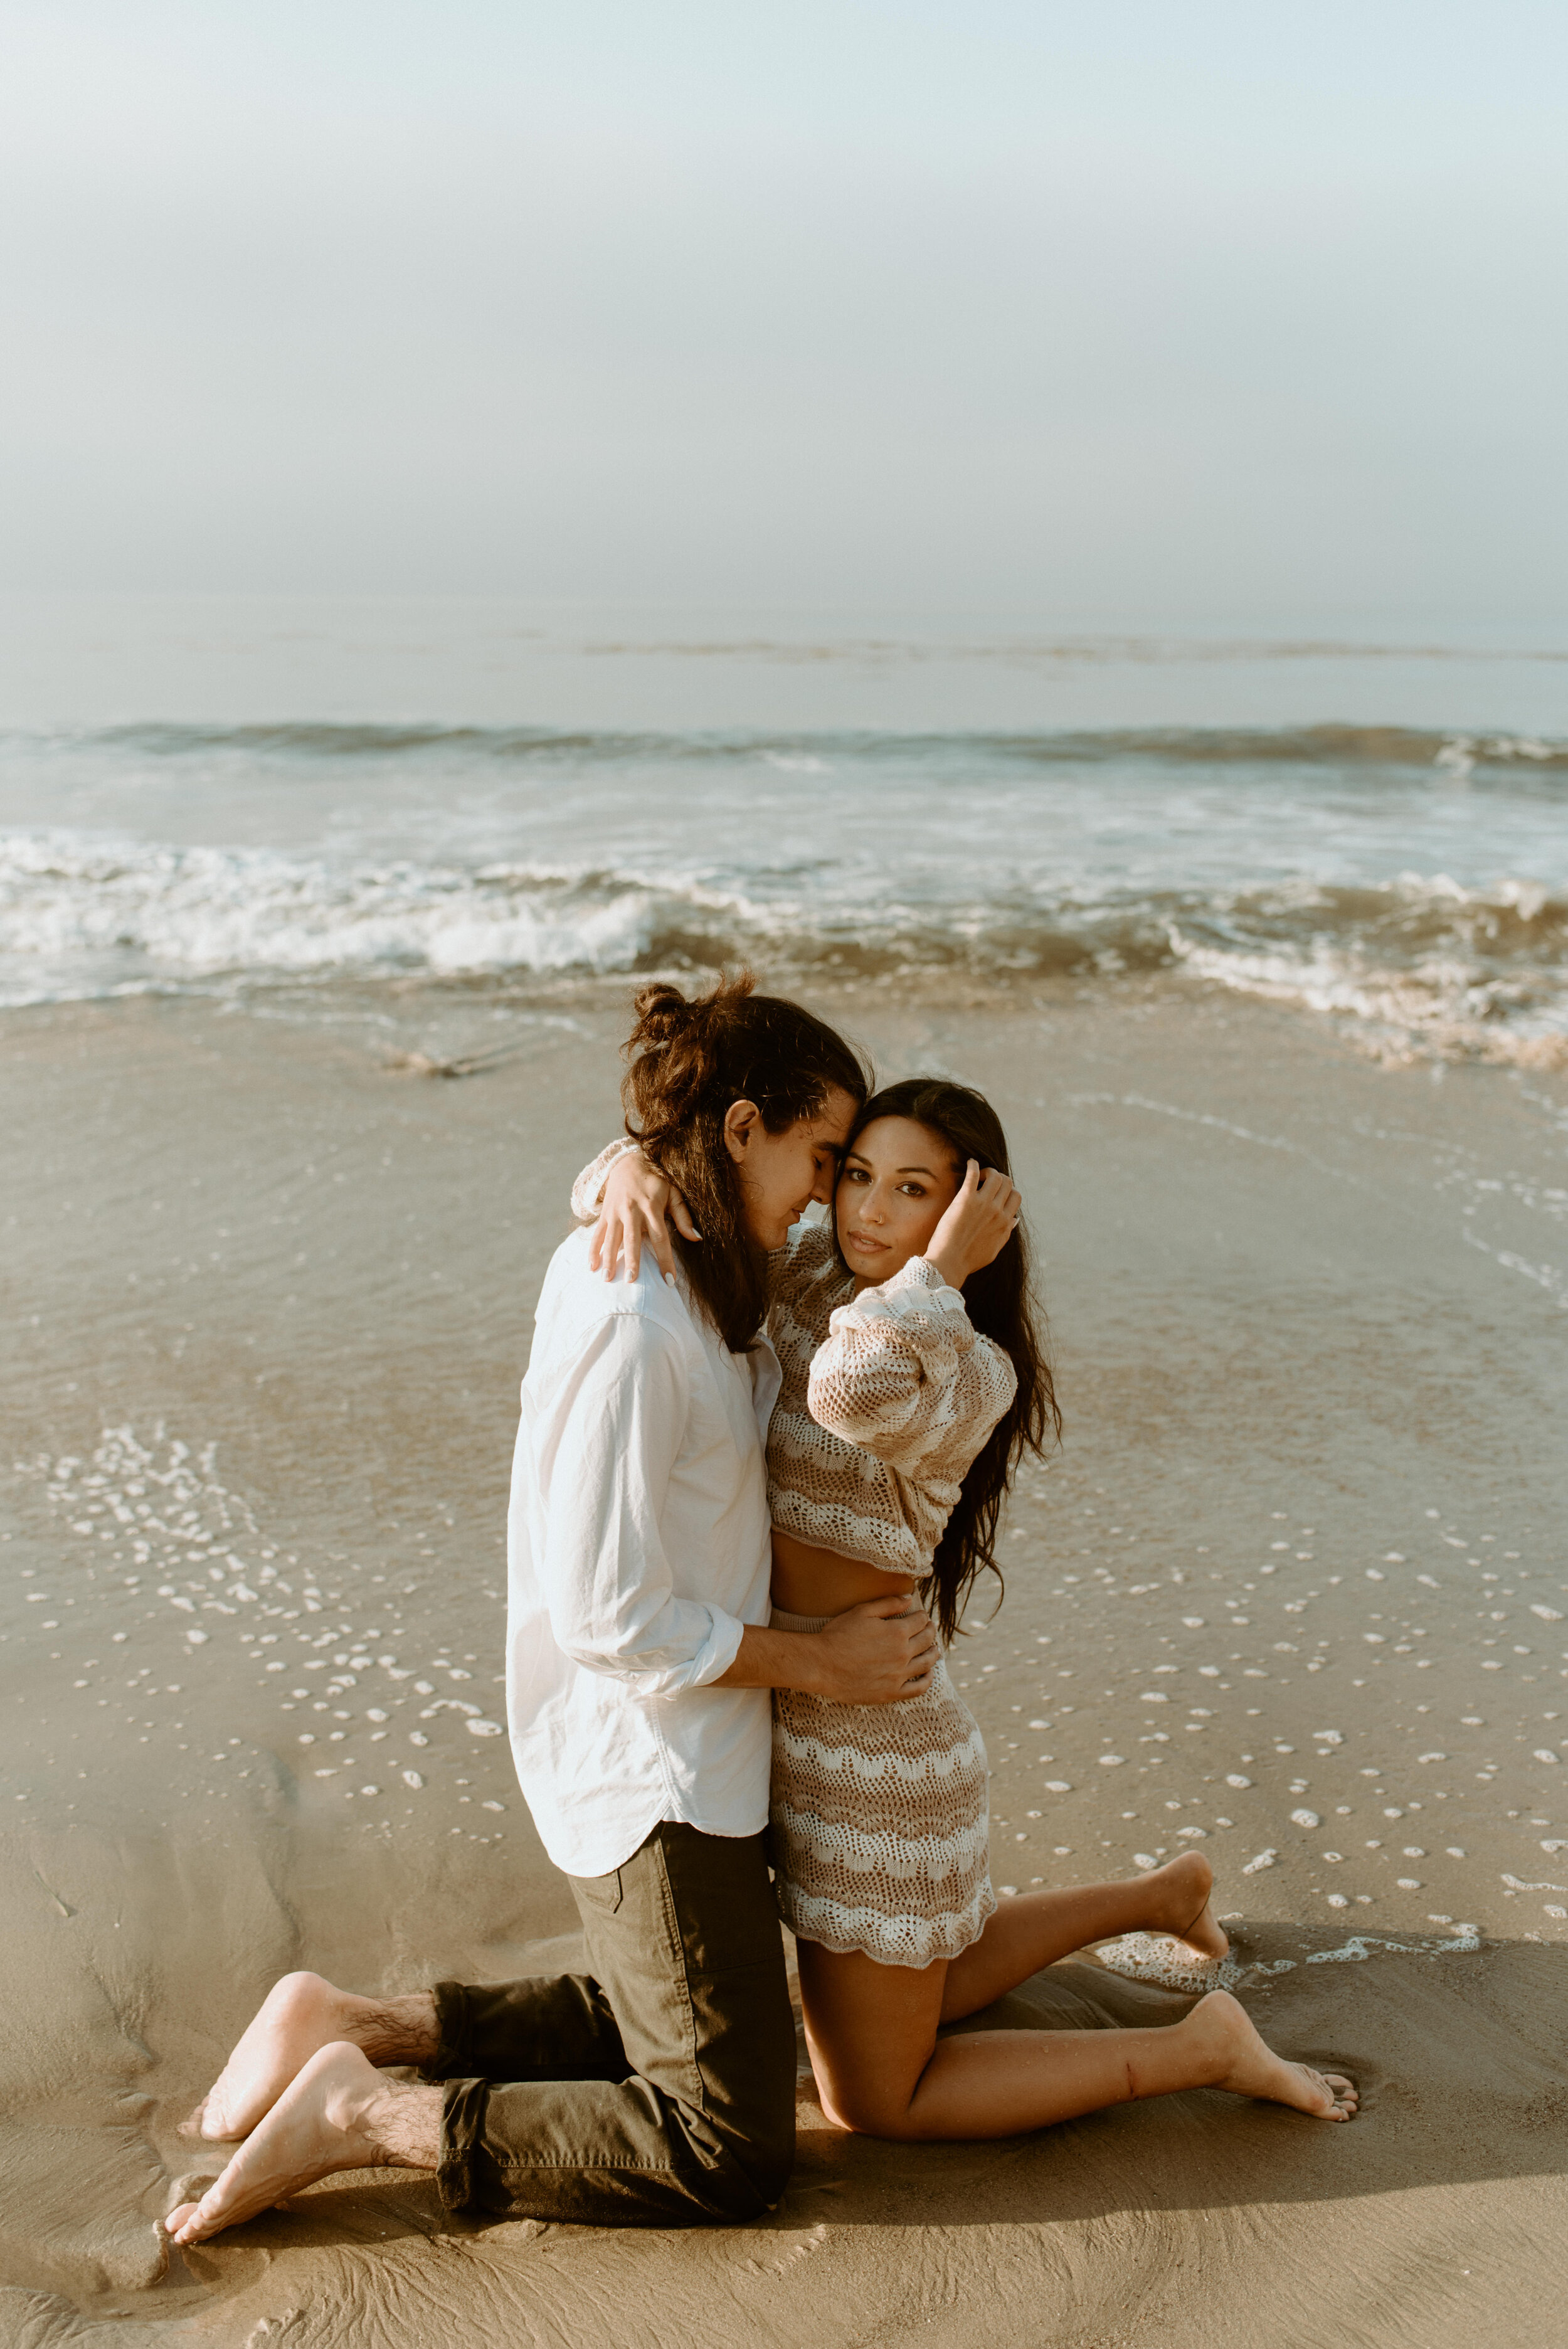 Sunrise Malibu Couples Photos | El Matador Beach Engagement Session | creative couples poses | sunrise at el matador beach | earthy neutral color couples outfits | couple in ocean water